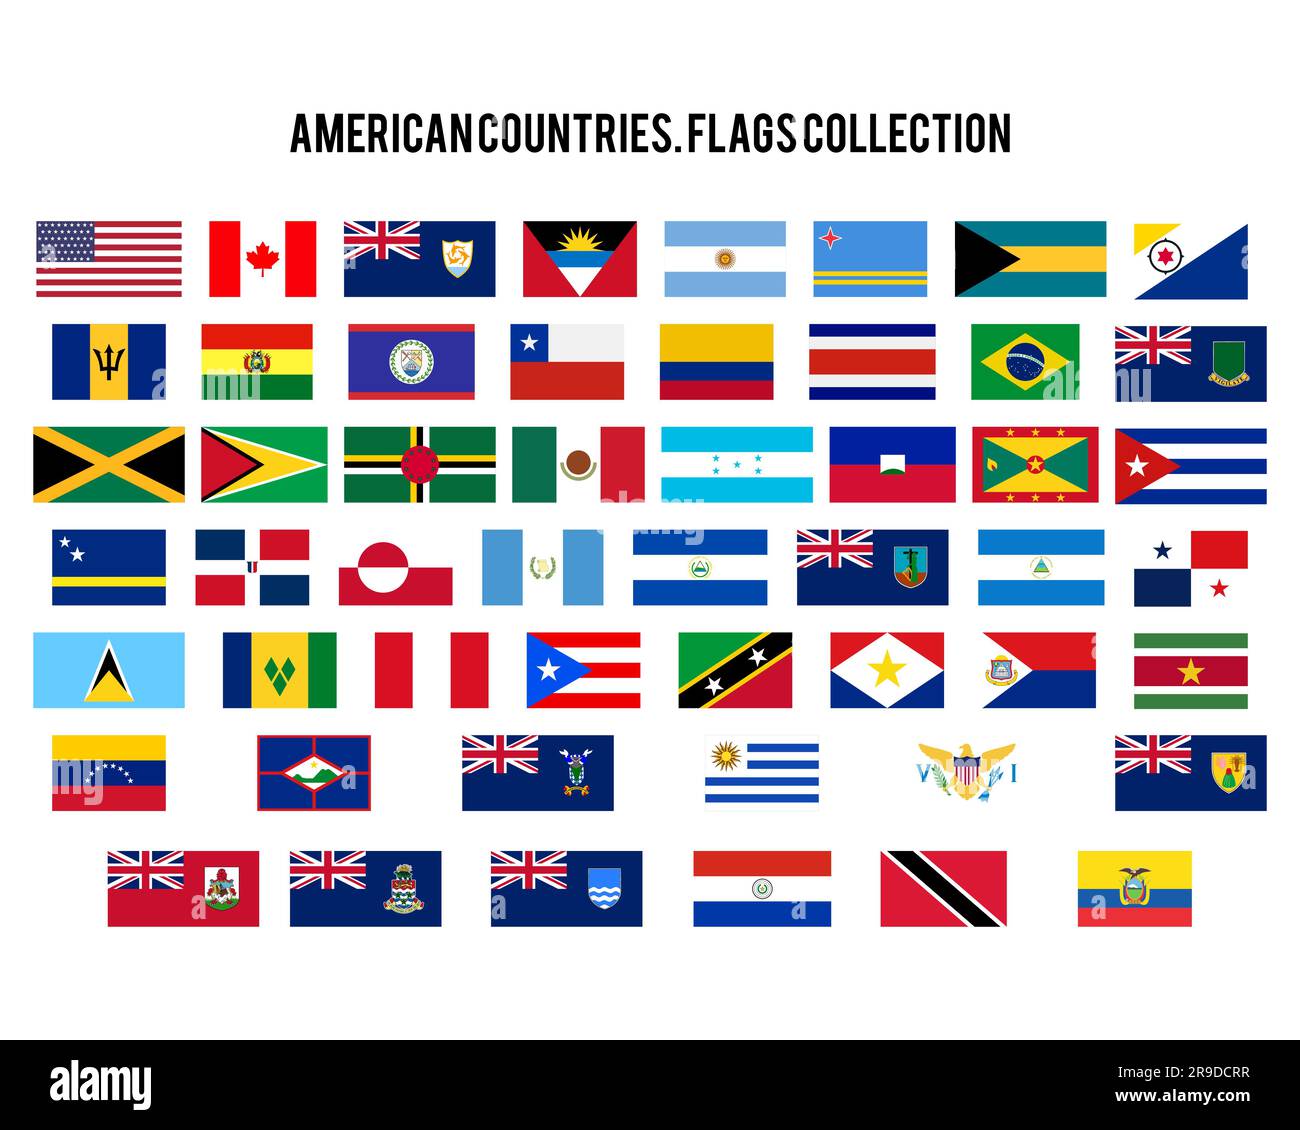 Americas Flag Icons Set. America Countries Original Flags - USA, Canada, Argentina and other. Stock Vector Graphics Element. 52 symbols Stock Vector